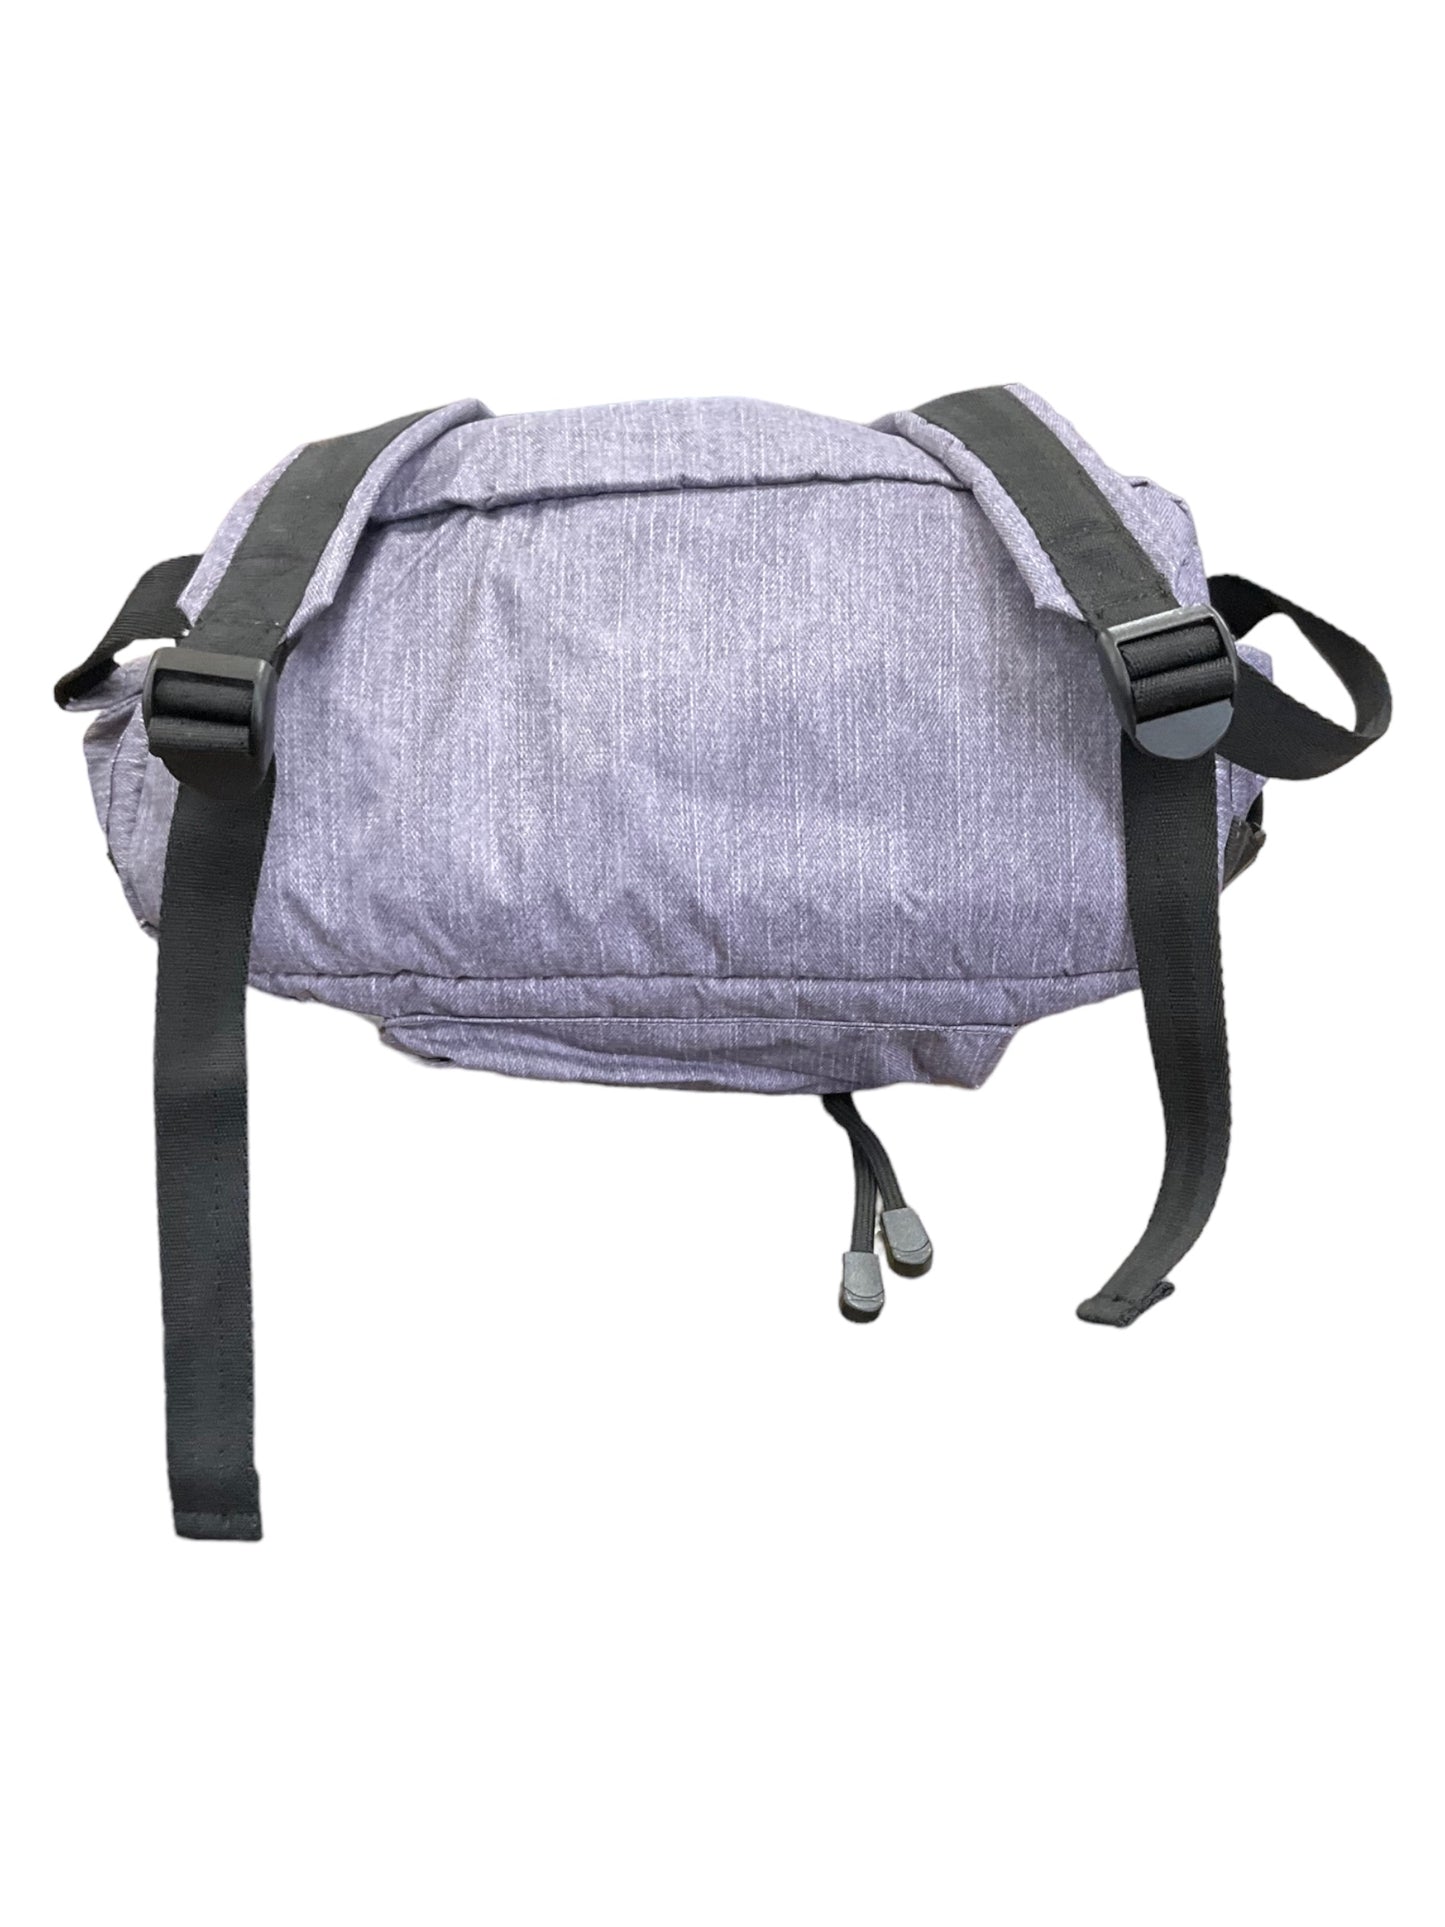 Backpack By Le Sport Sac  Size: Medium